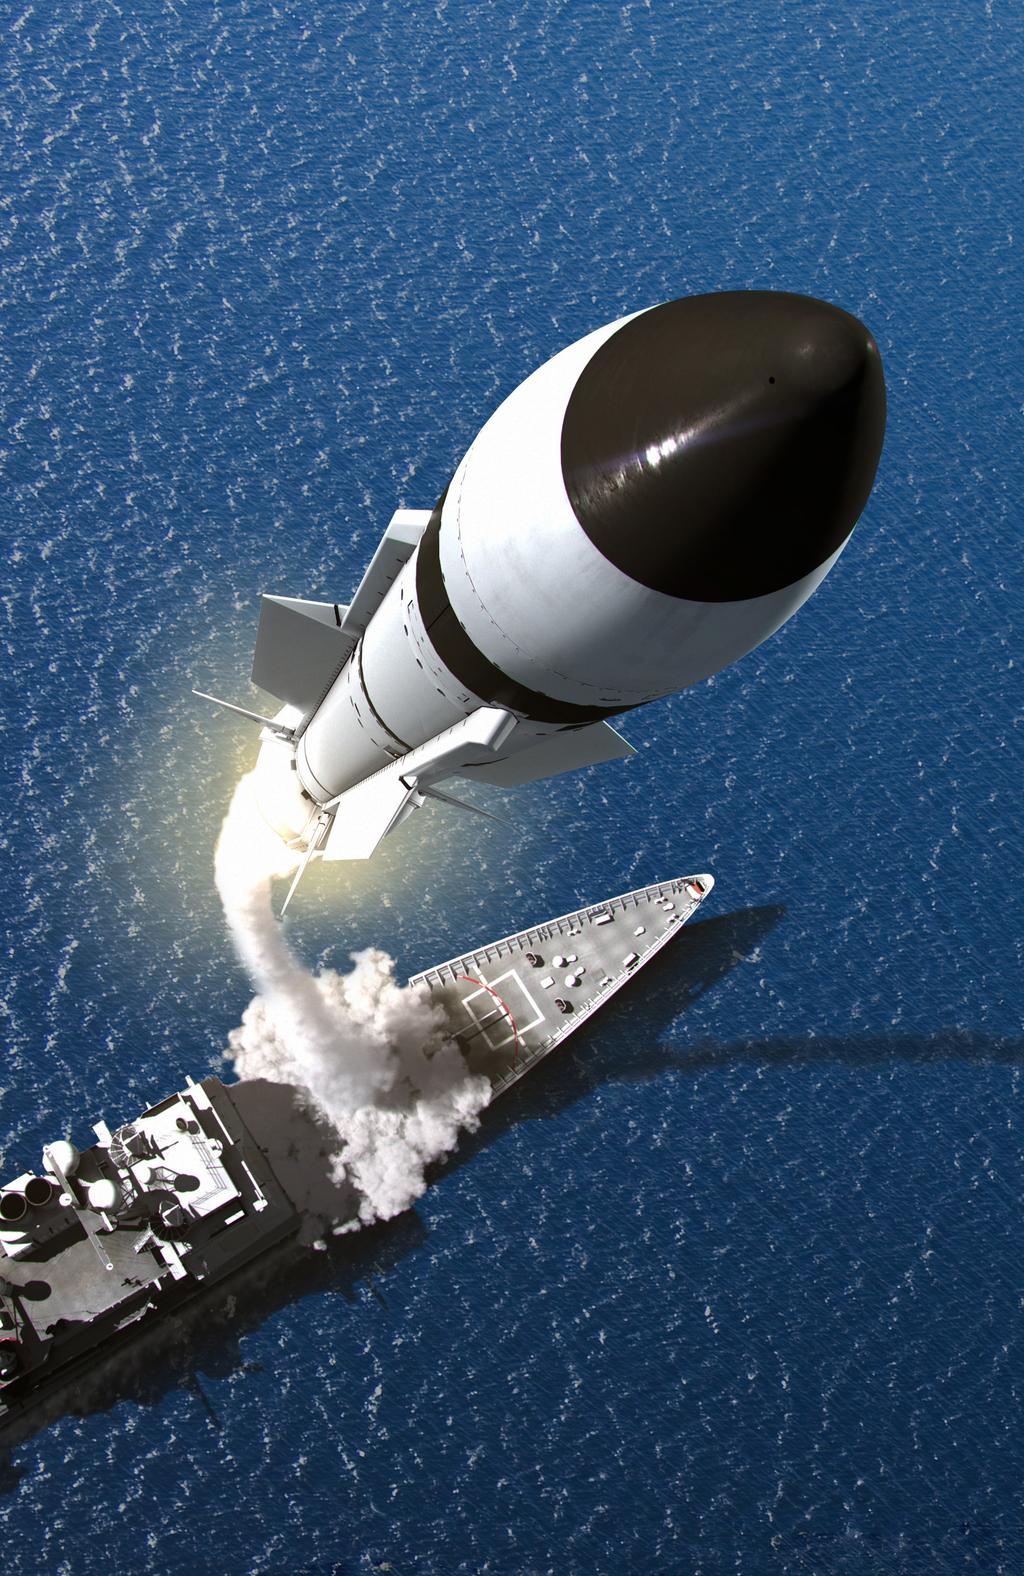 Evolved Sea Sparrow Missile (ESSM) NATO s Evolved Sea Sparrow Missile, and the ground-launched derivative, are the world standard for international cooperation, providing for ship and local area